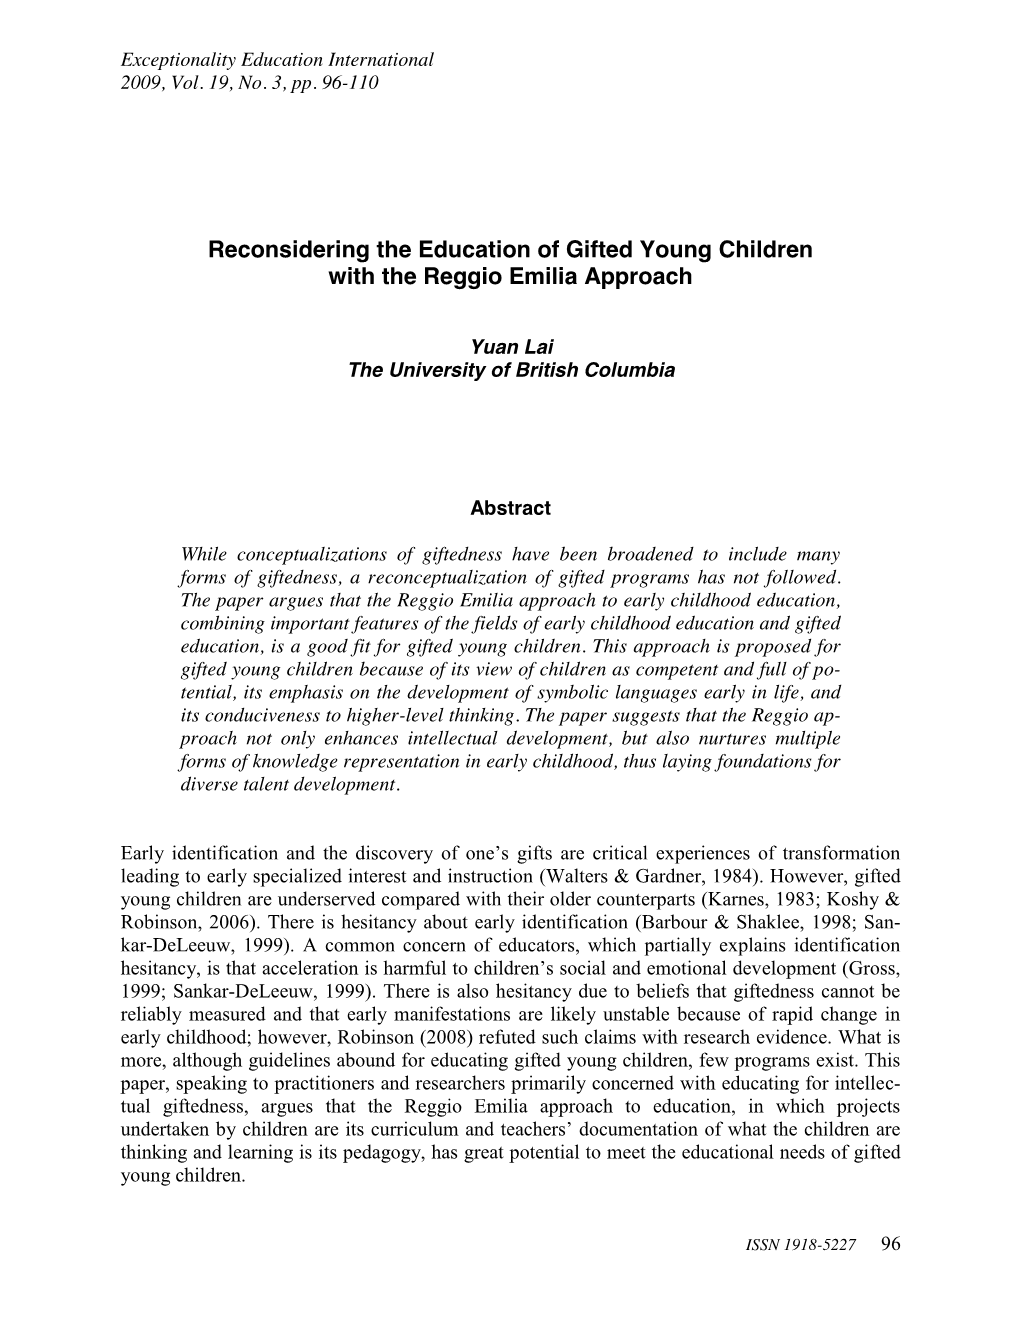 Reconsidering the Education of Gifted Young Children with the Reggio Emilia Approach